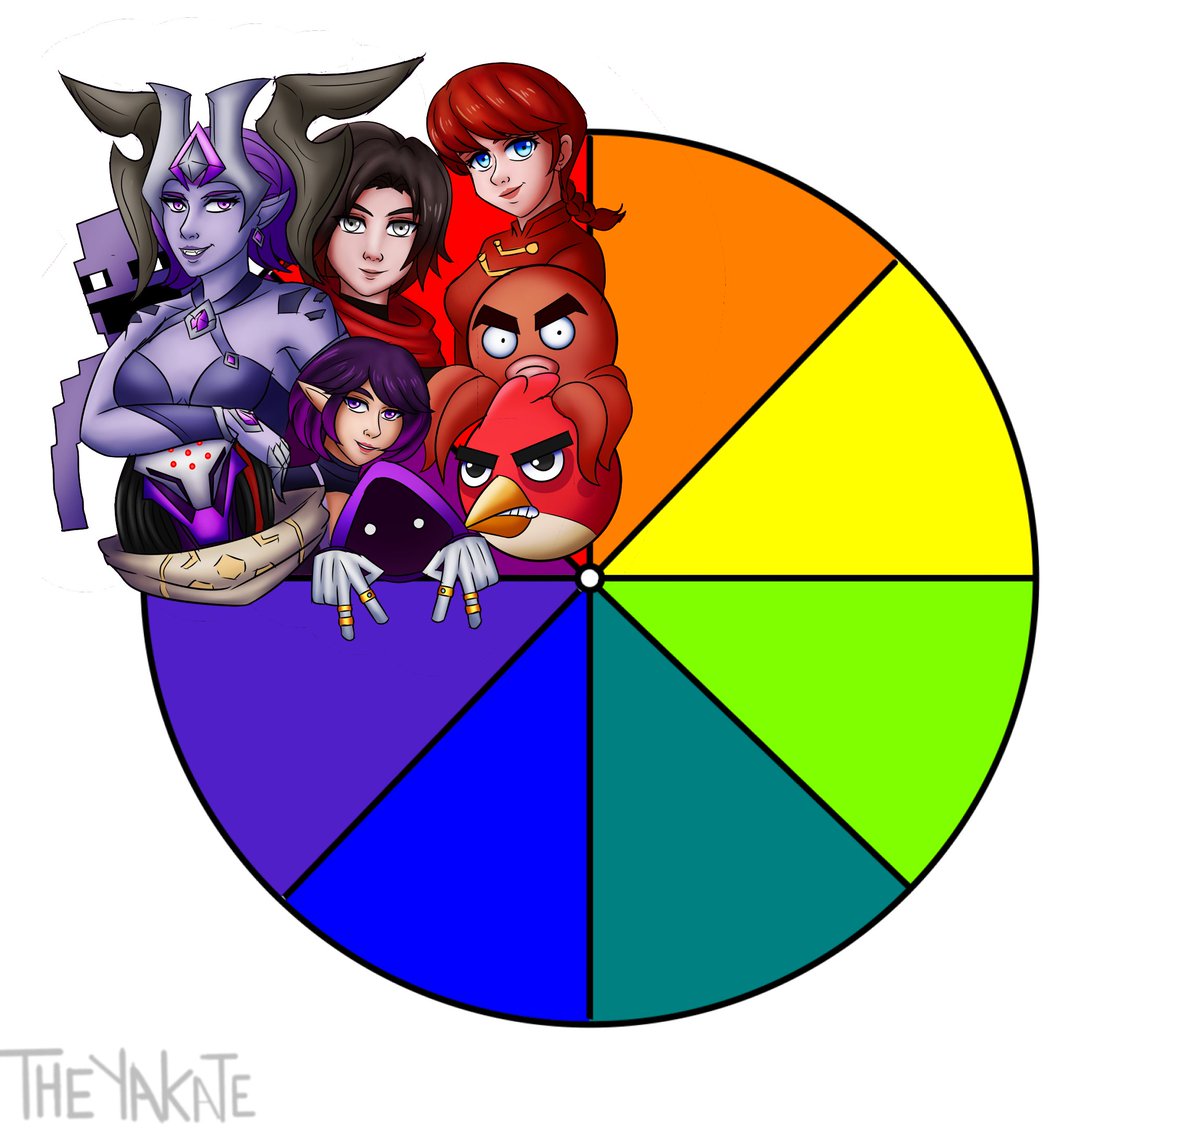 Purple is done! Now for Violet!
#colorwheel